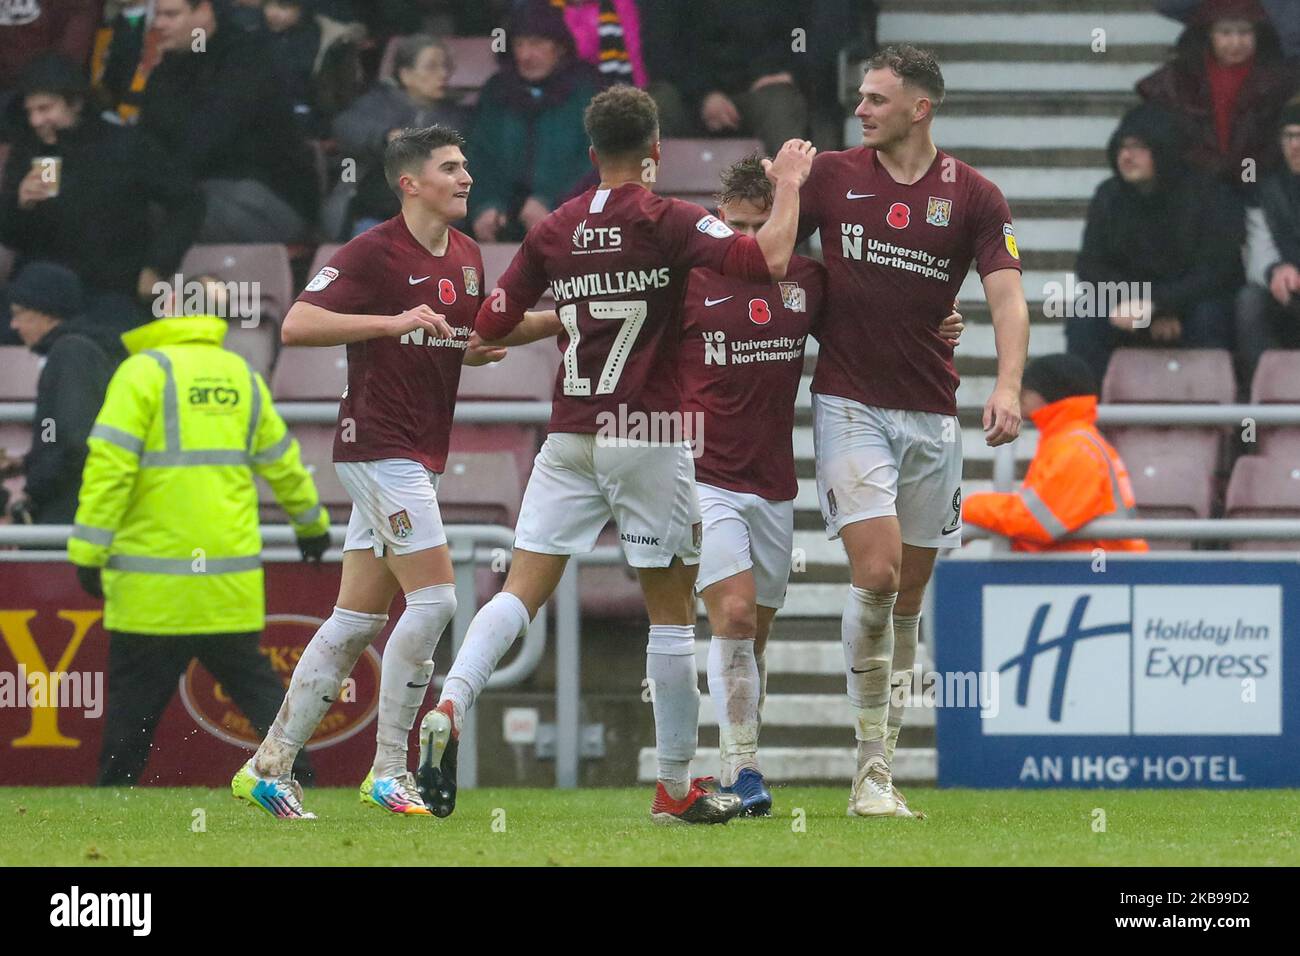 Harry Smith celebrates after scoring for Northampton Town, to take the lead making it 2 - 0 against Cambridge United, during the Sky Bet League 2 match between Northampton Town and Cambridge United at the PTS Academy Stadium, Northampton on Saturday 26th October 2019. (Photo by John Cripps/MI News/NurPhoto) Stock Photo